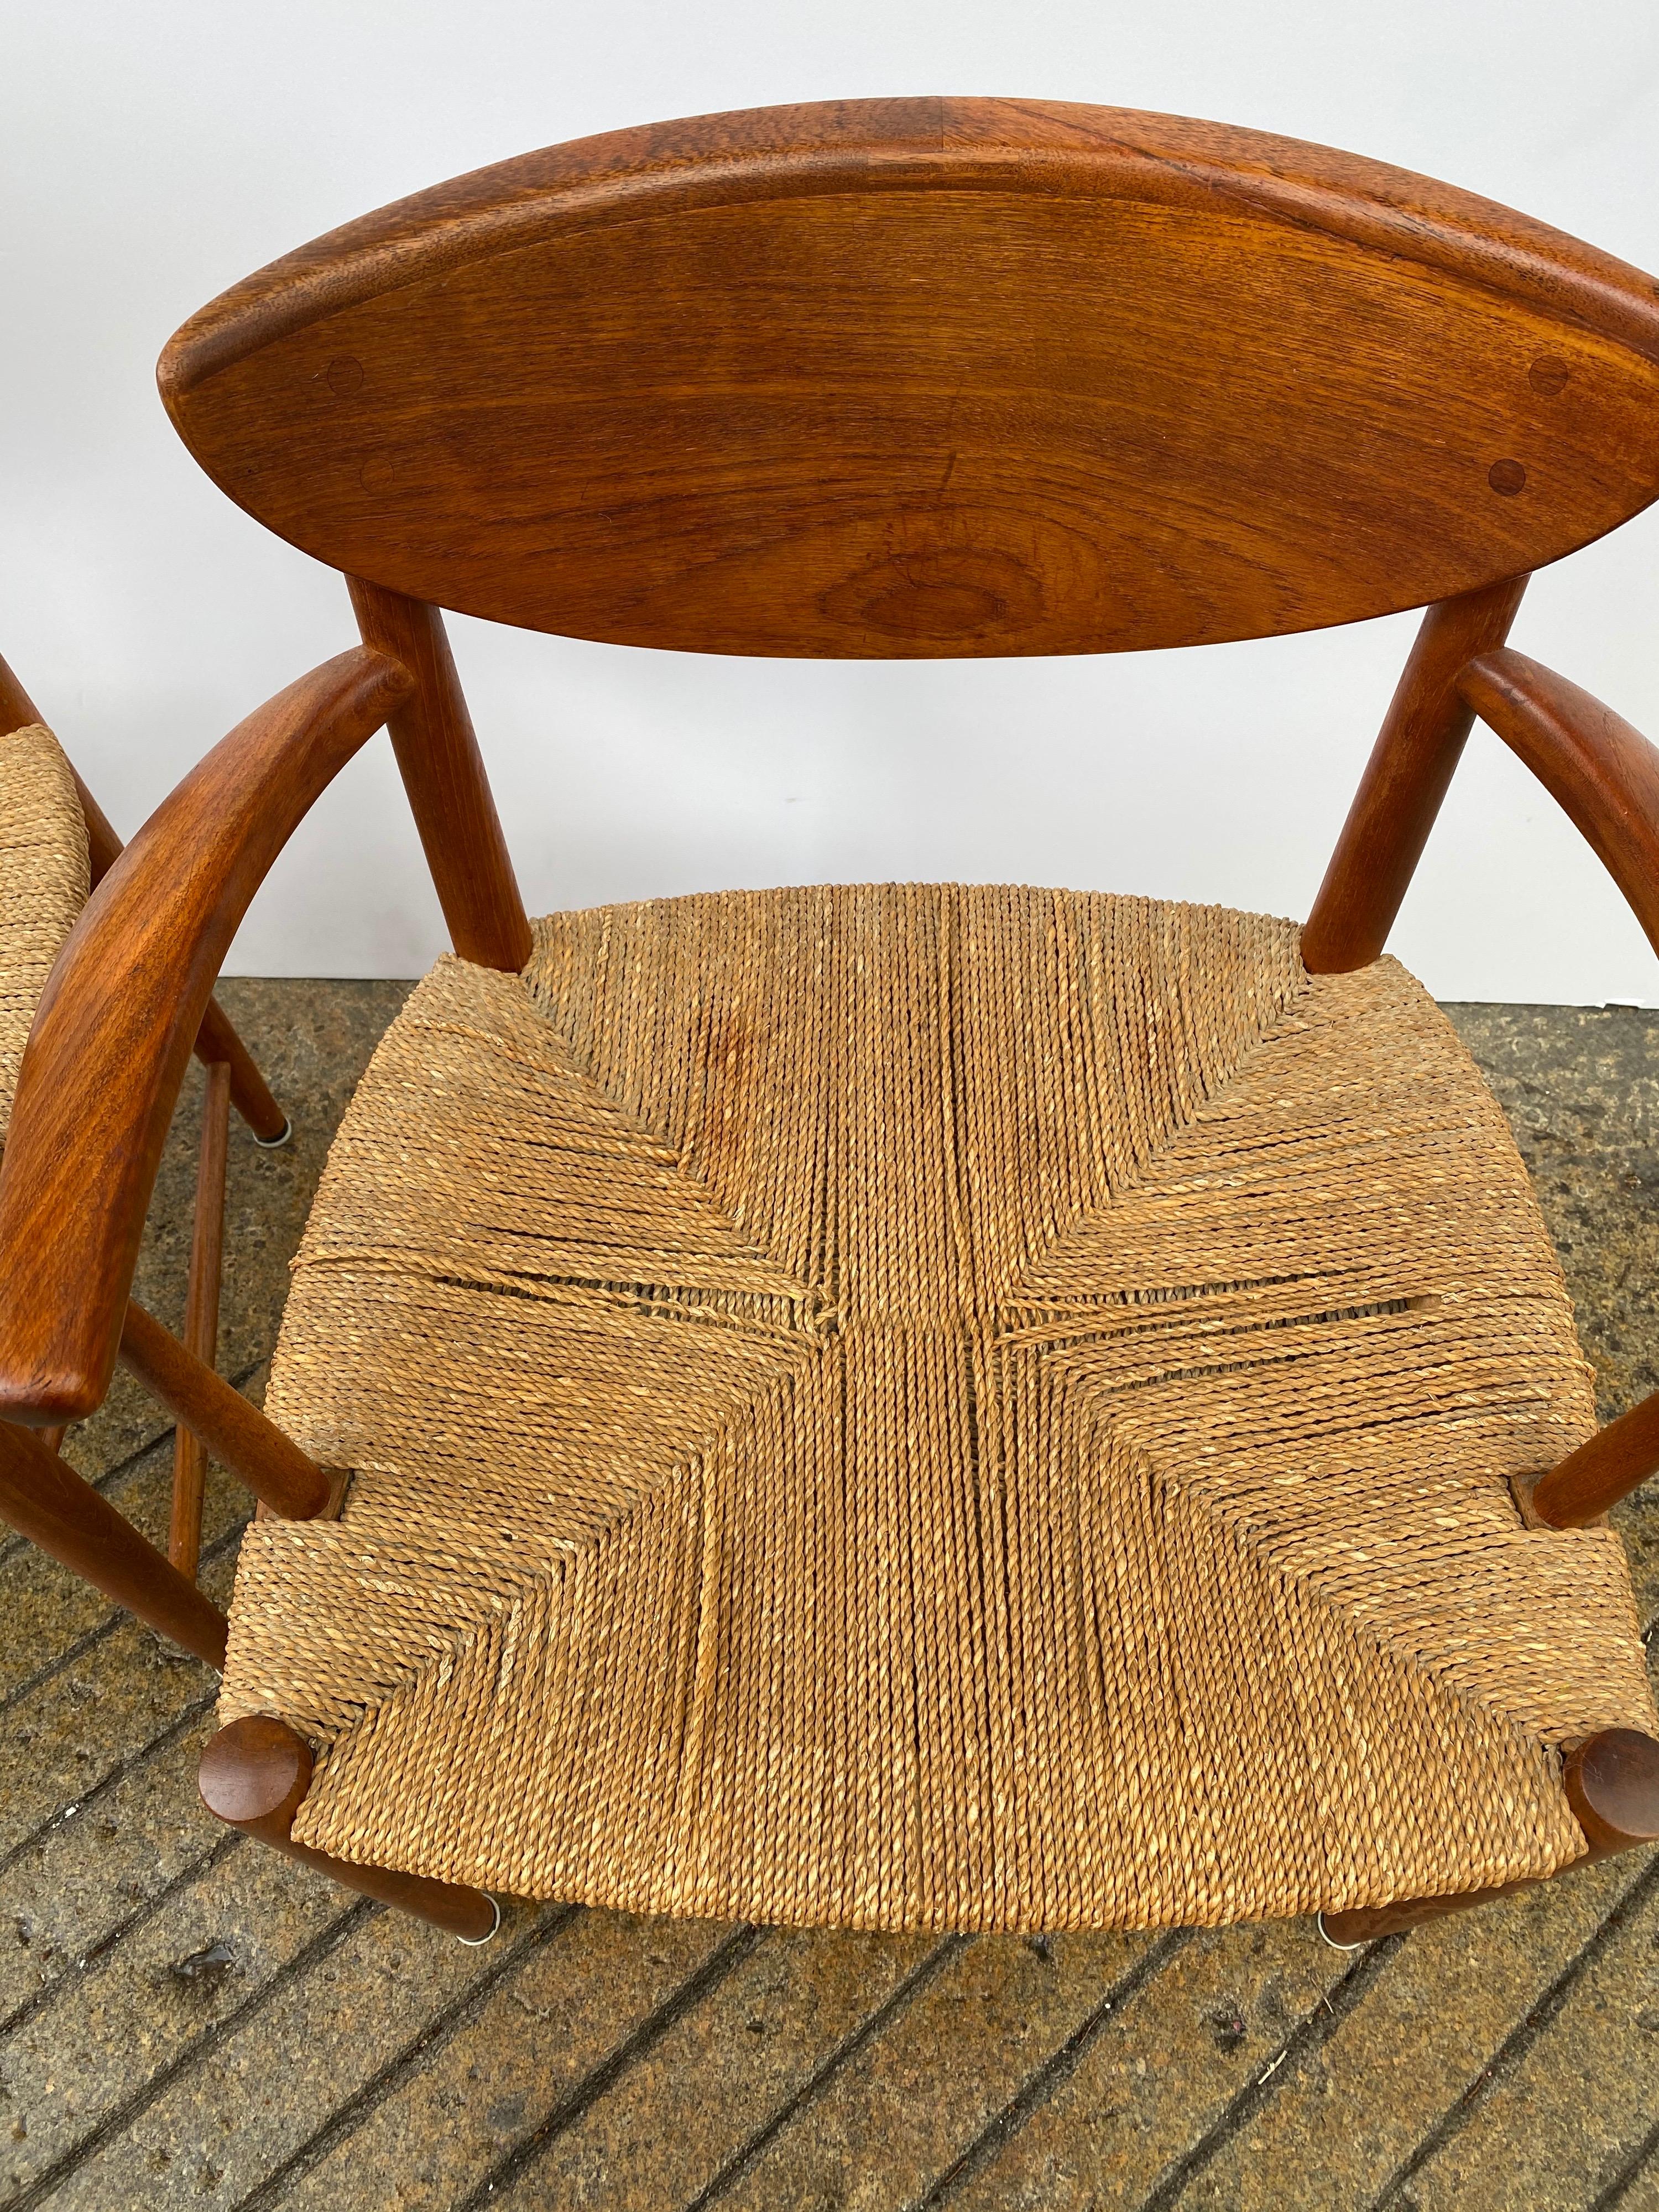 Mid-20th Century Peter Hvidt and Orla Molgaard-Nielsen Arm Chairs